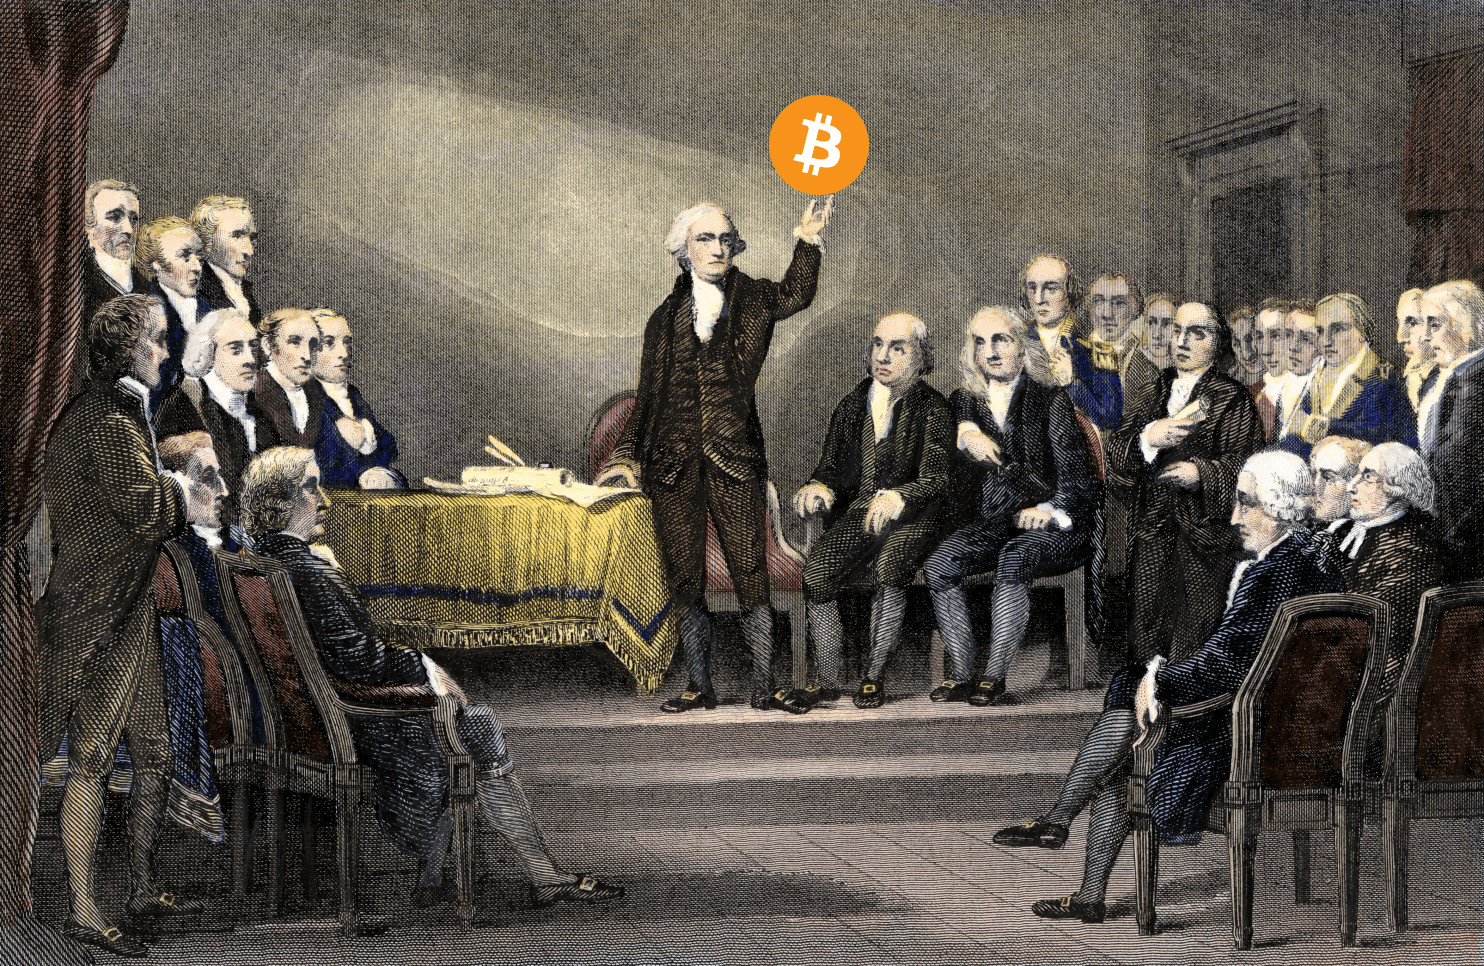 What would the Benjamin Franklin think of Bitcoin?